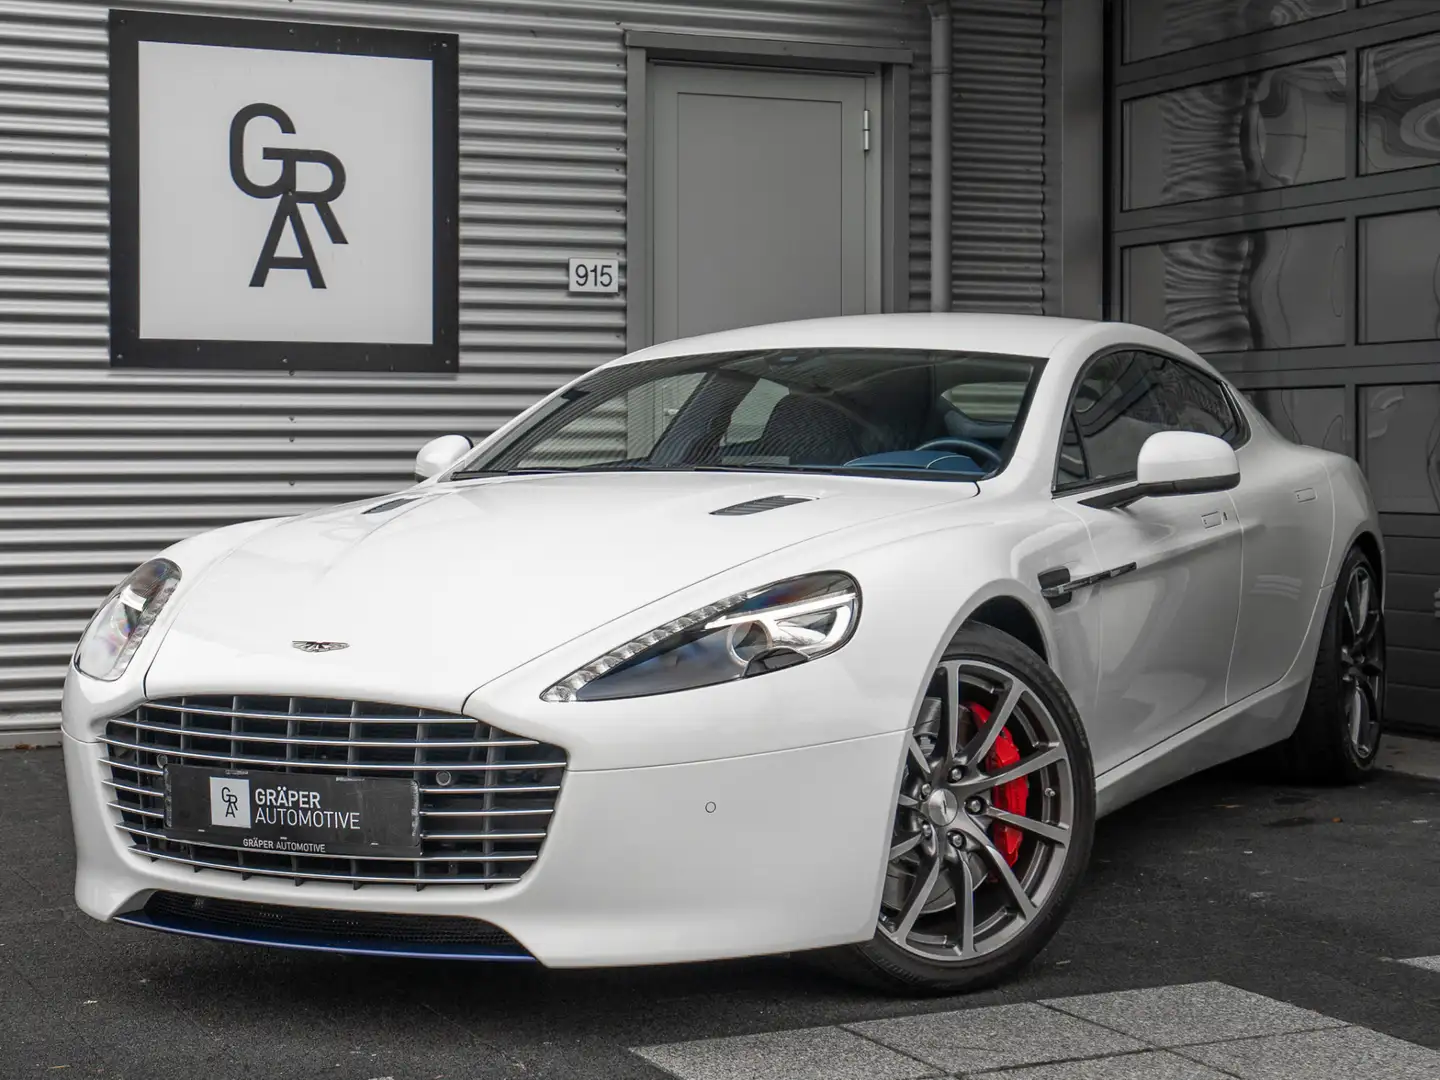 Aston Martin Rapide S 6.0 V12 ‘Britain is Great’ Edition by Q 1/8 bijela - 1